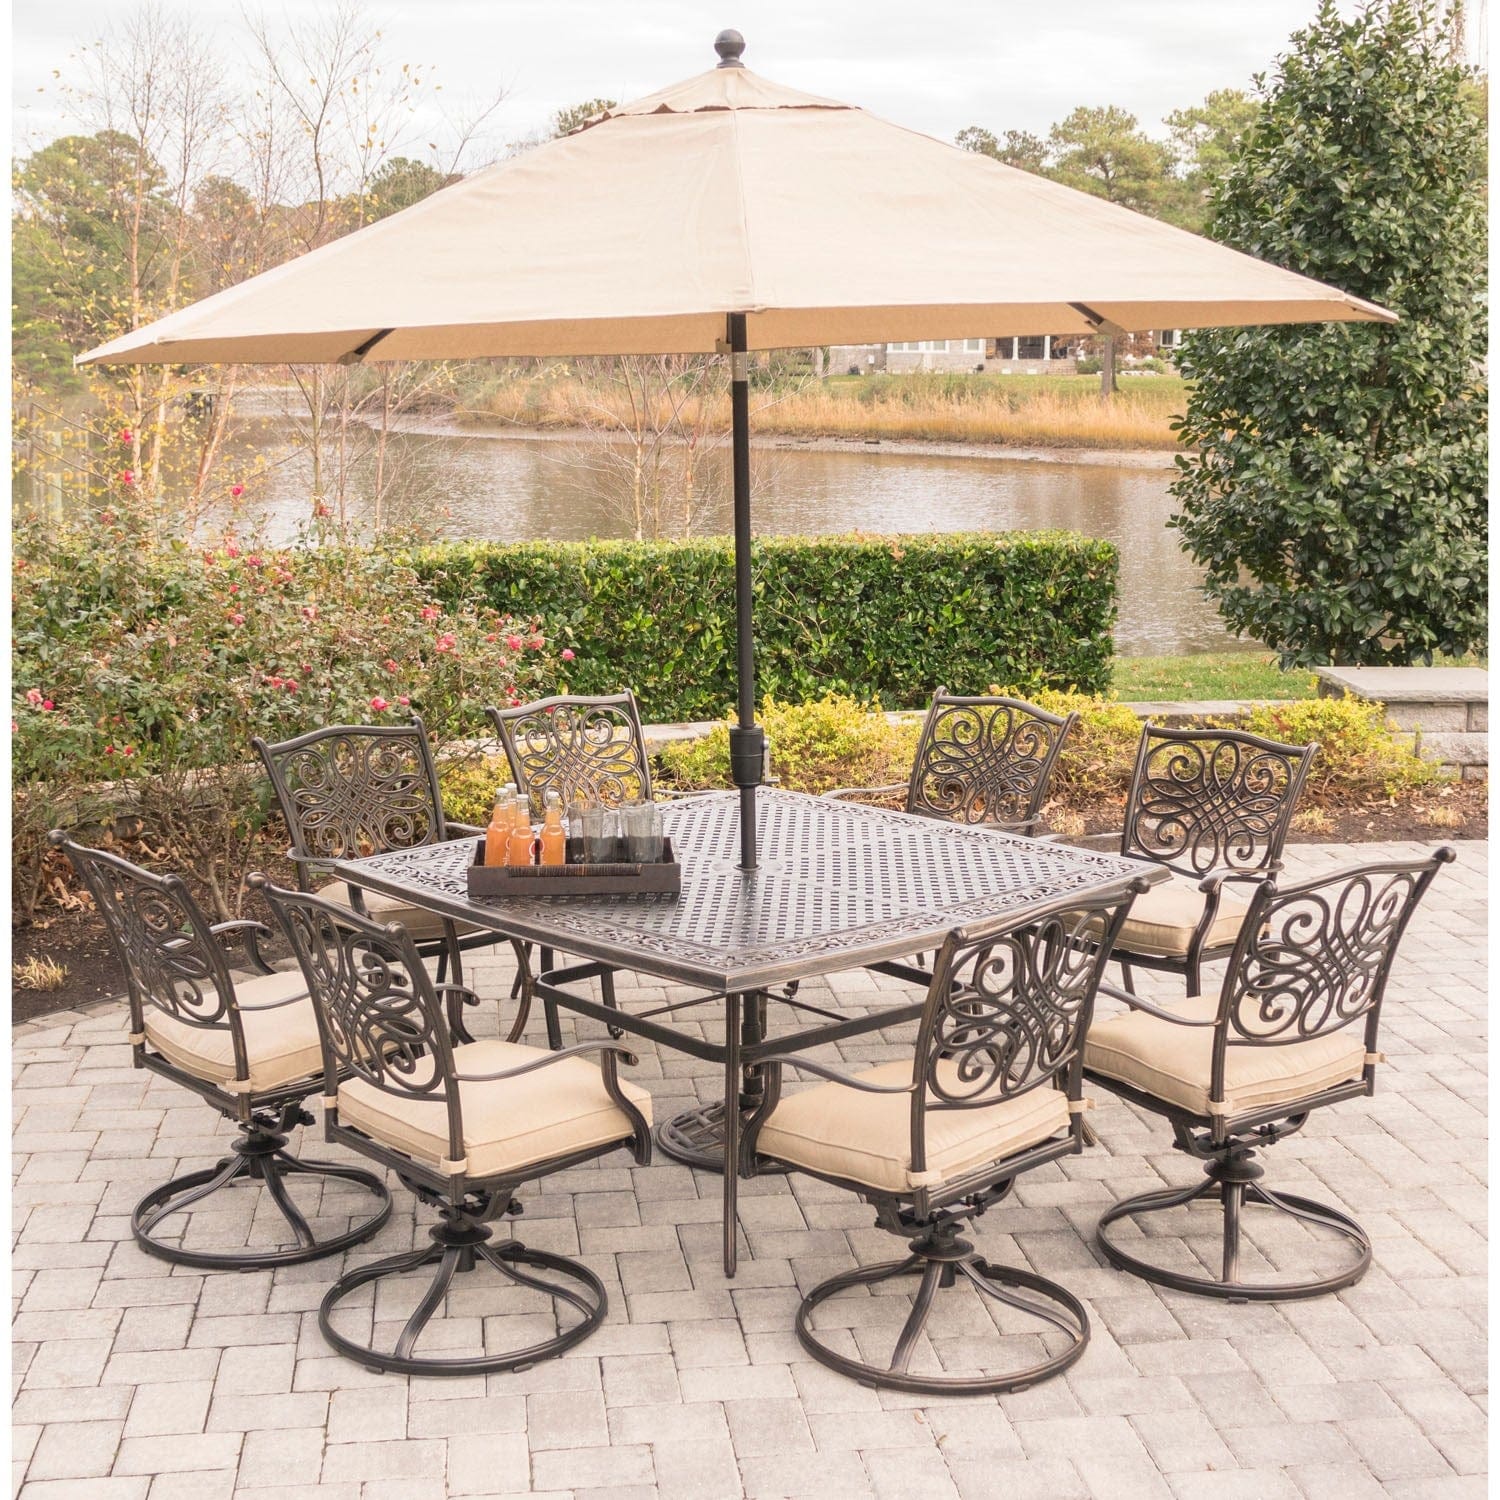 Hanover Outdoor Dining Set Hanover Traditions 9-Piece Aluminium Frame Dining Set in Tan with 60 In. Square Cast-Top Dining Table, 11 Ft. Table Umbrella, and Umbrella Stand | TRADDN9PCSWSQ8-SU